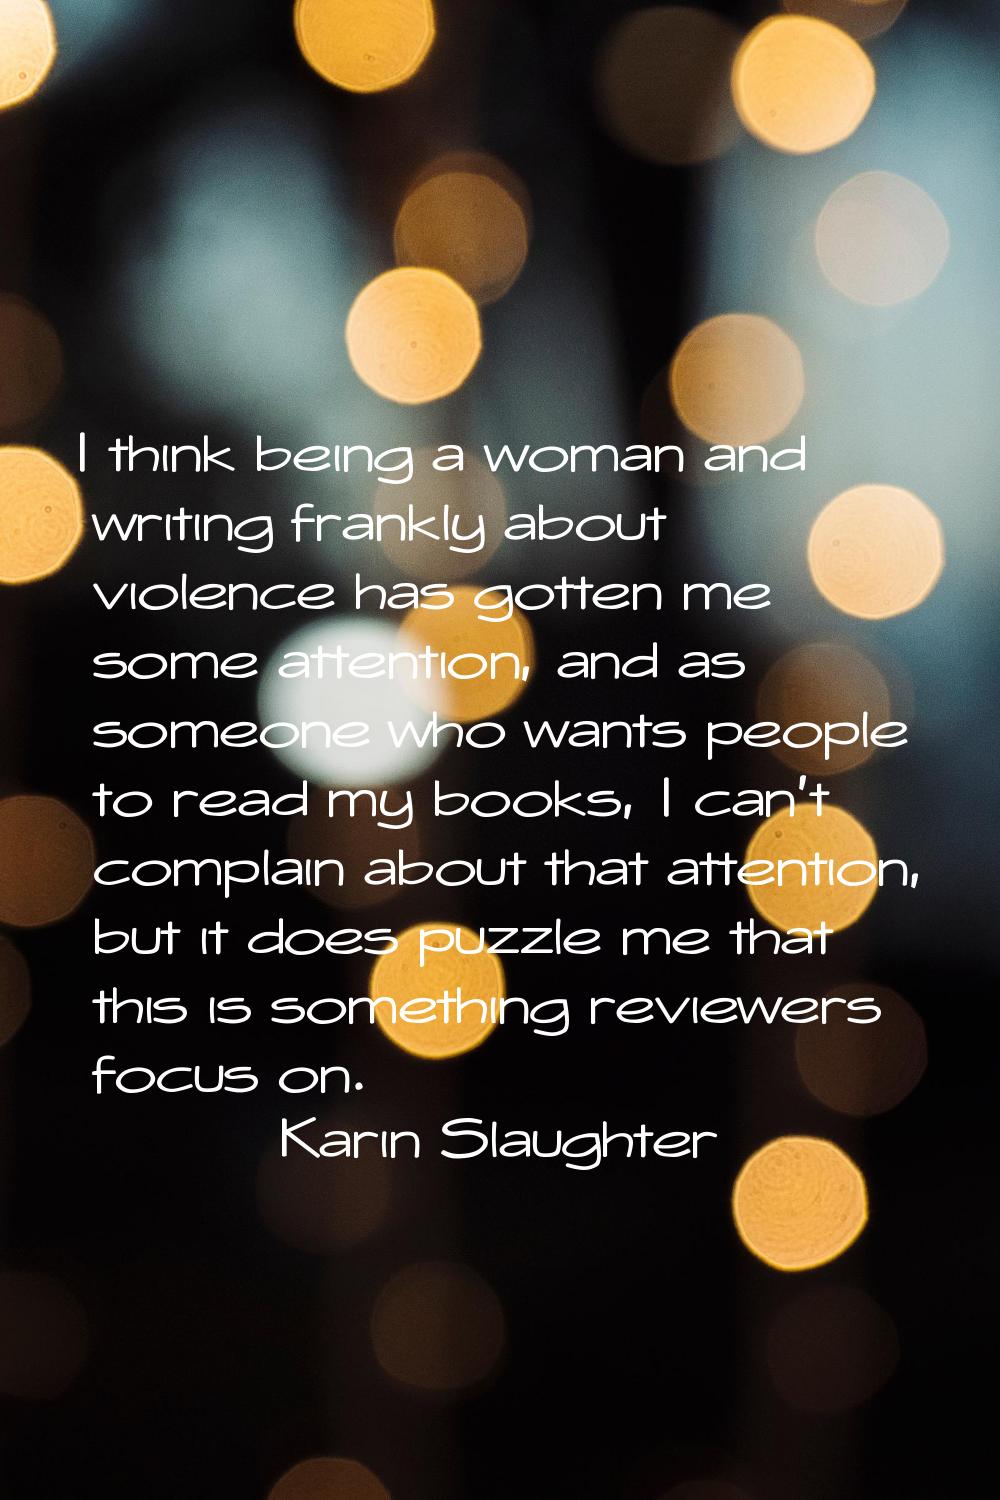 I think being a woman and writing frankly about violence has gotten me some attention, and as someo